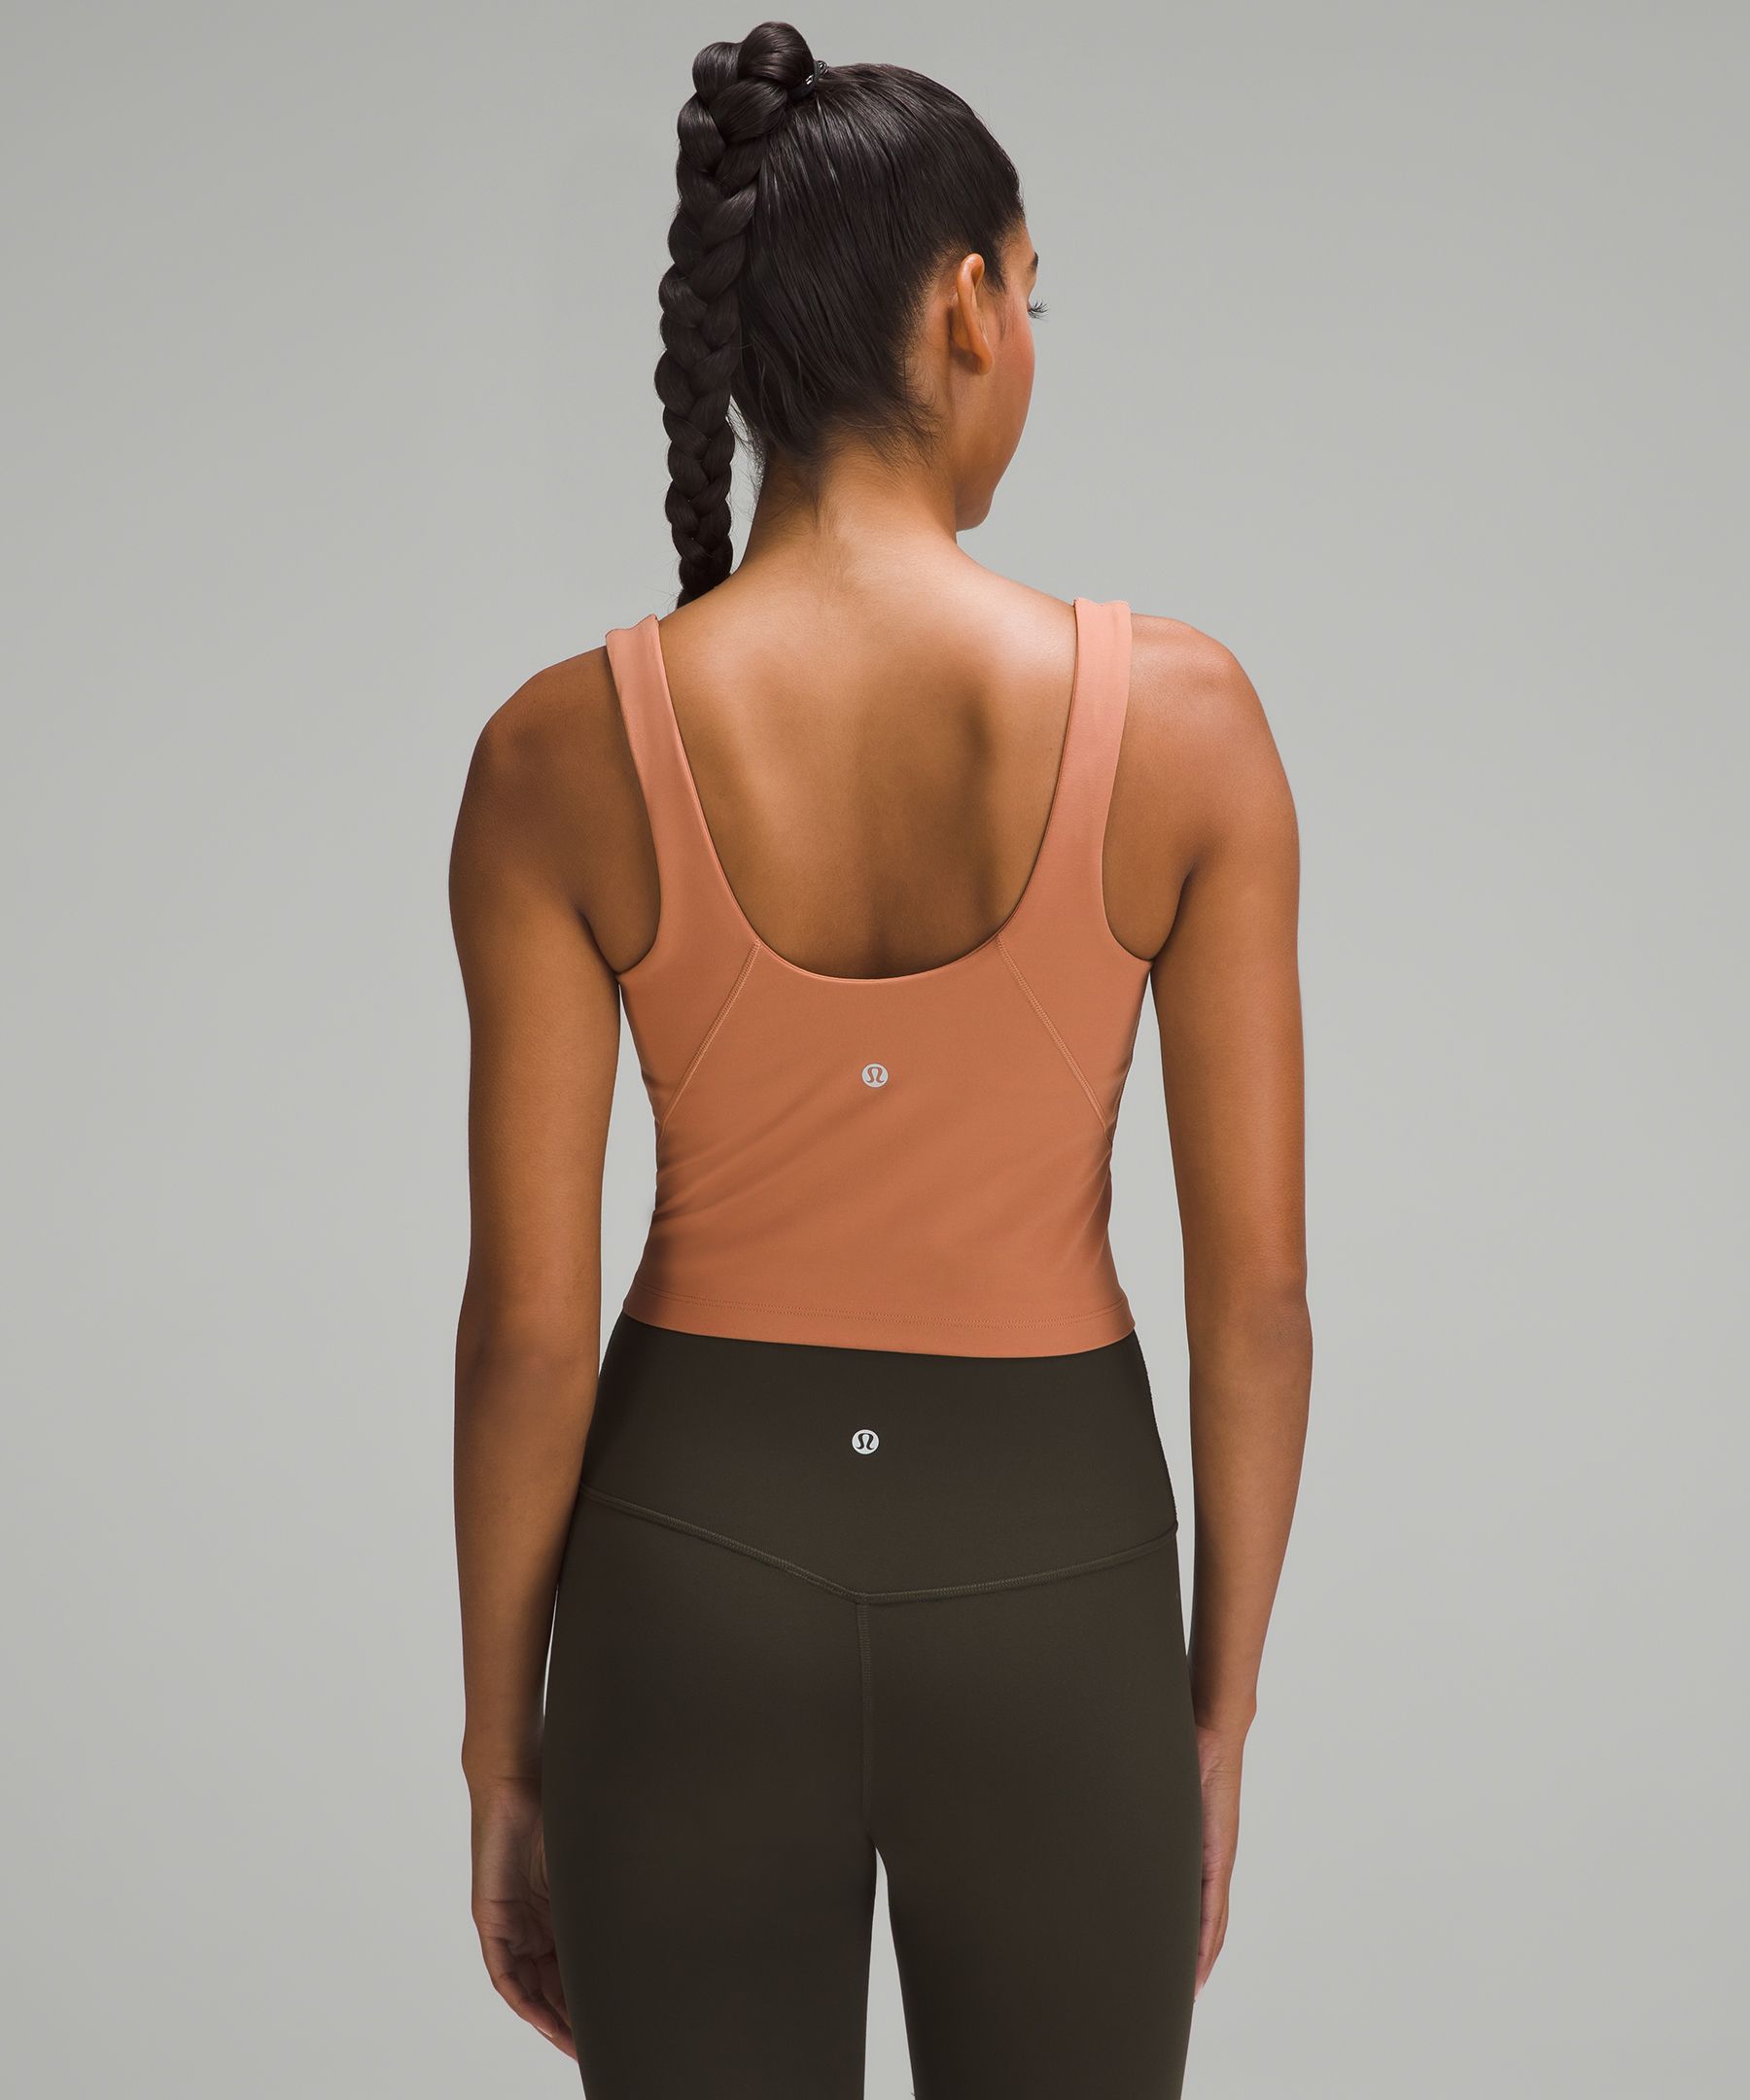 Lululemon Align Tank Multiple Size 2 - $40 (41% Off Retail) - From